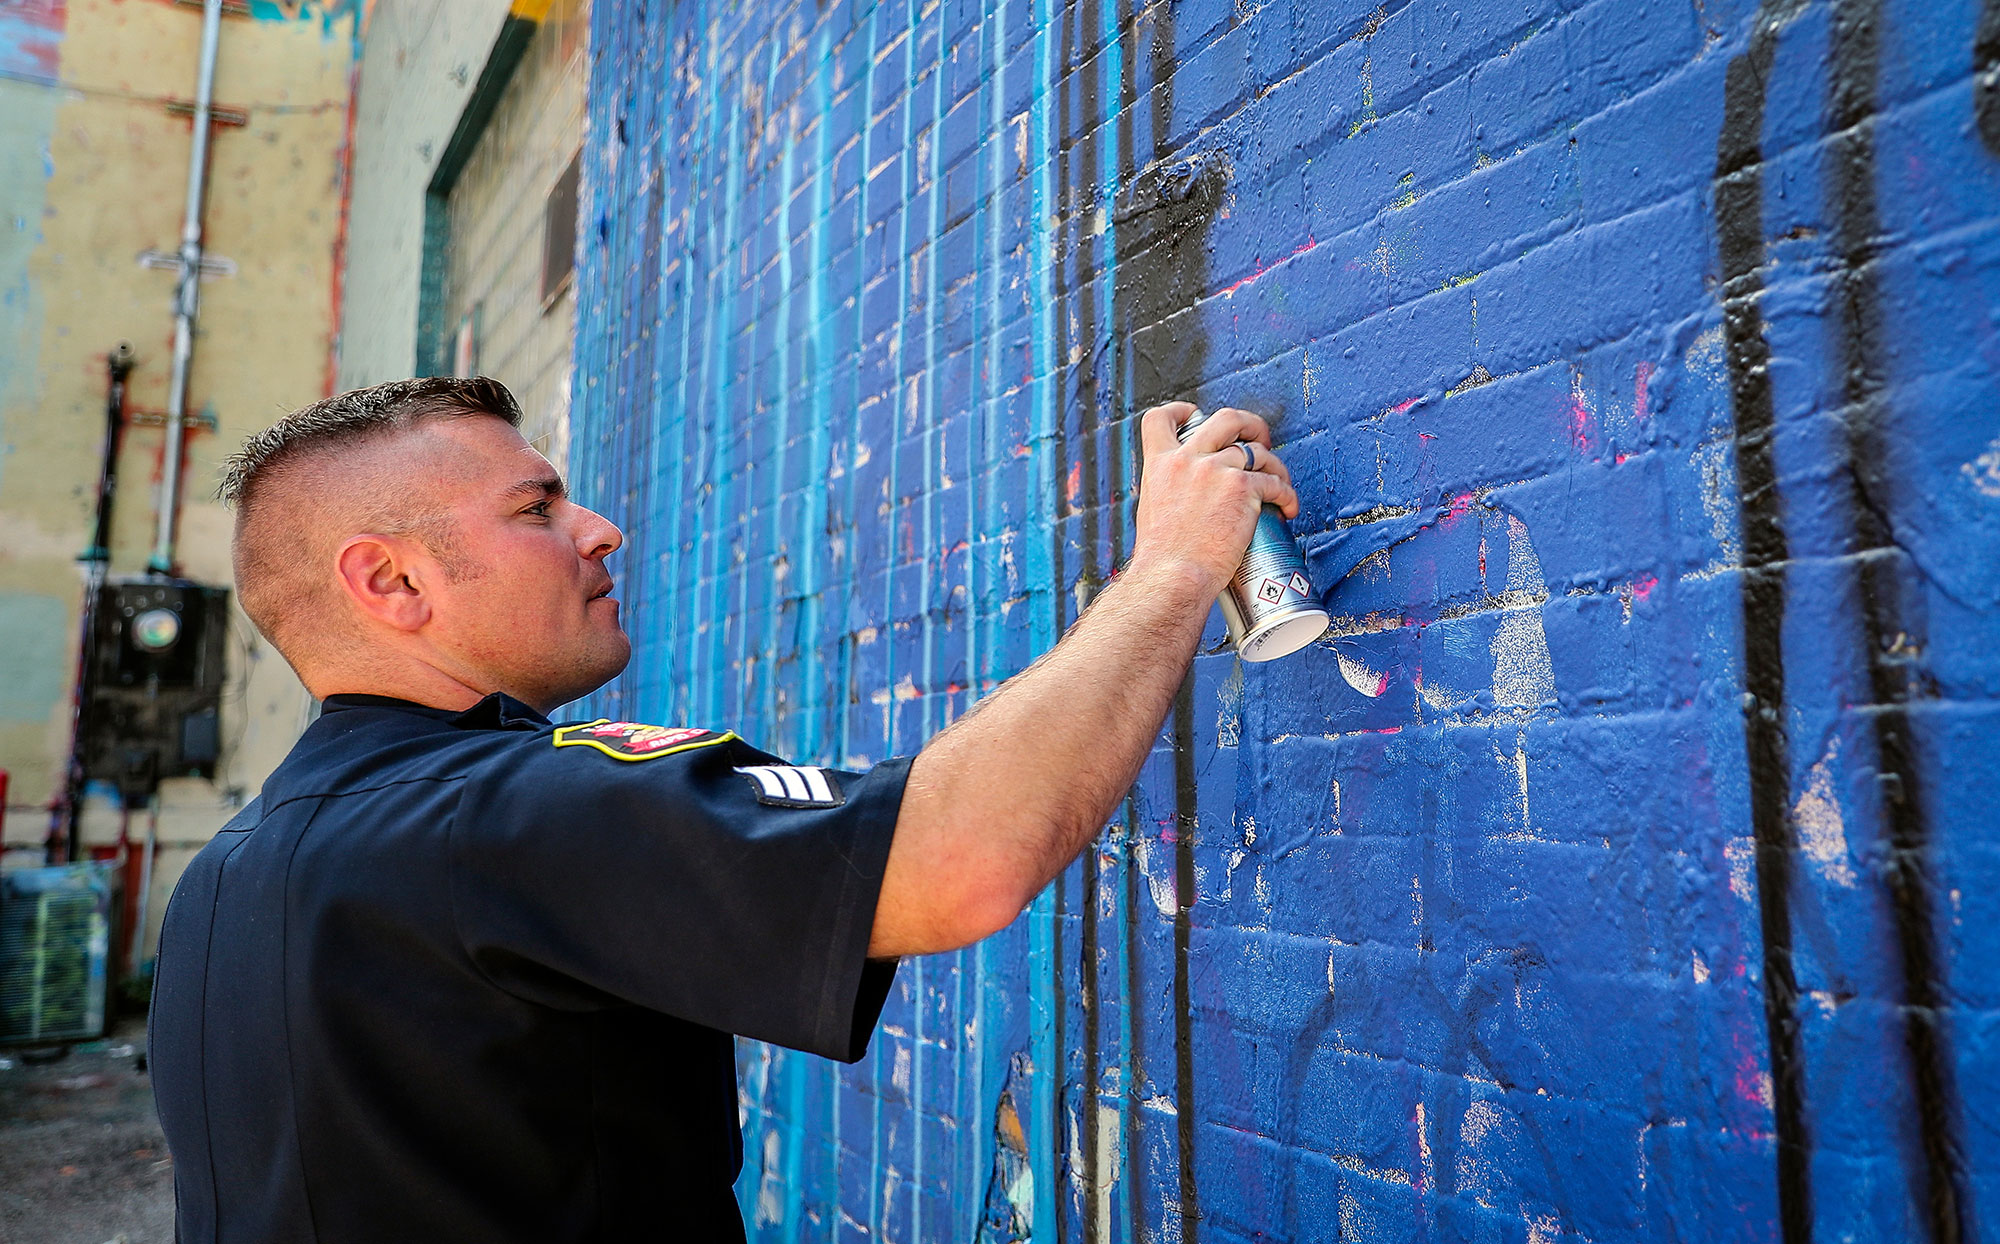 Police Officer with Spray Can